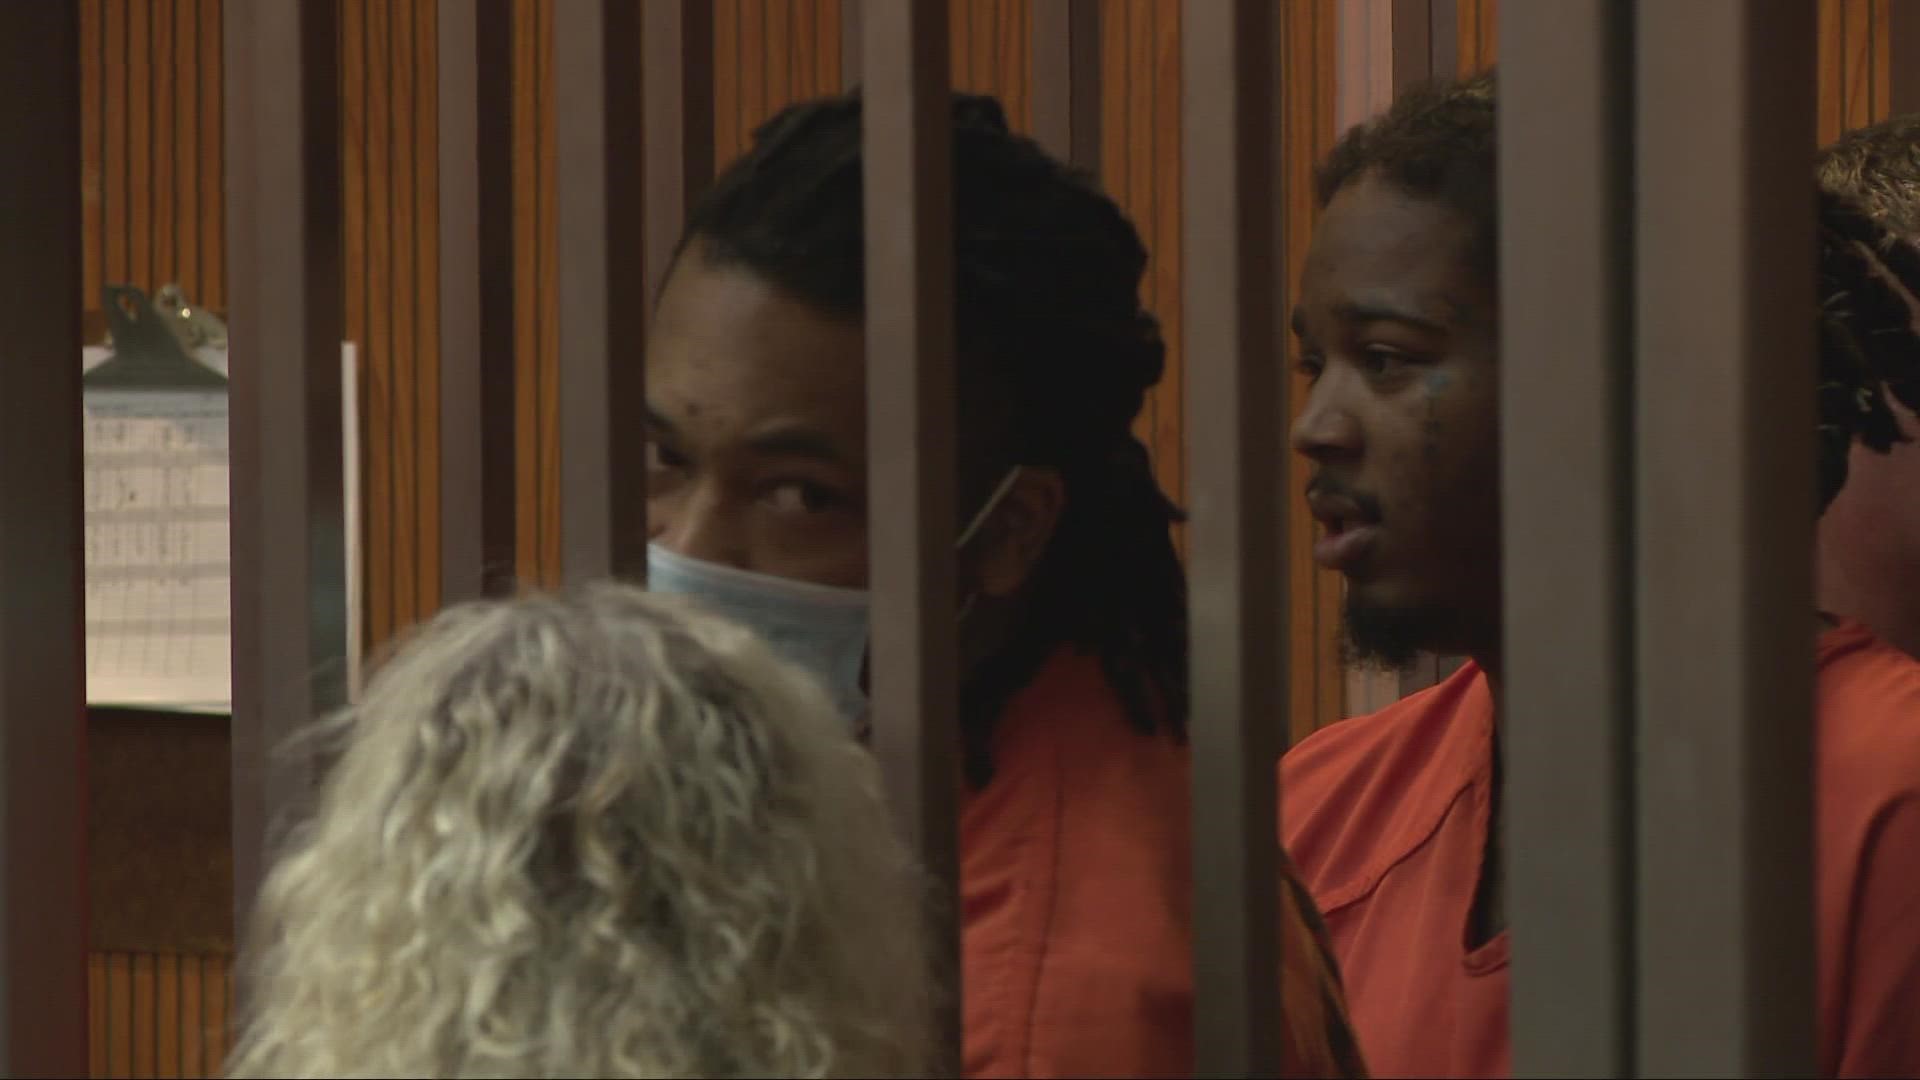 Attorneys speaking for three of the K Street shooting suspects said in court Tuesday they are still waiting to receive documents from the Sacramento County DA.